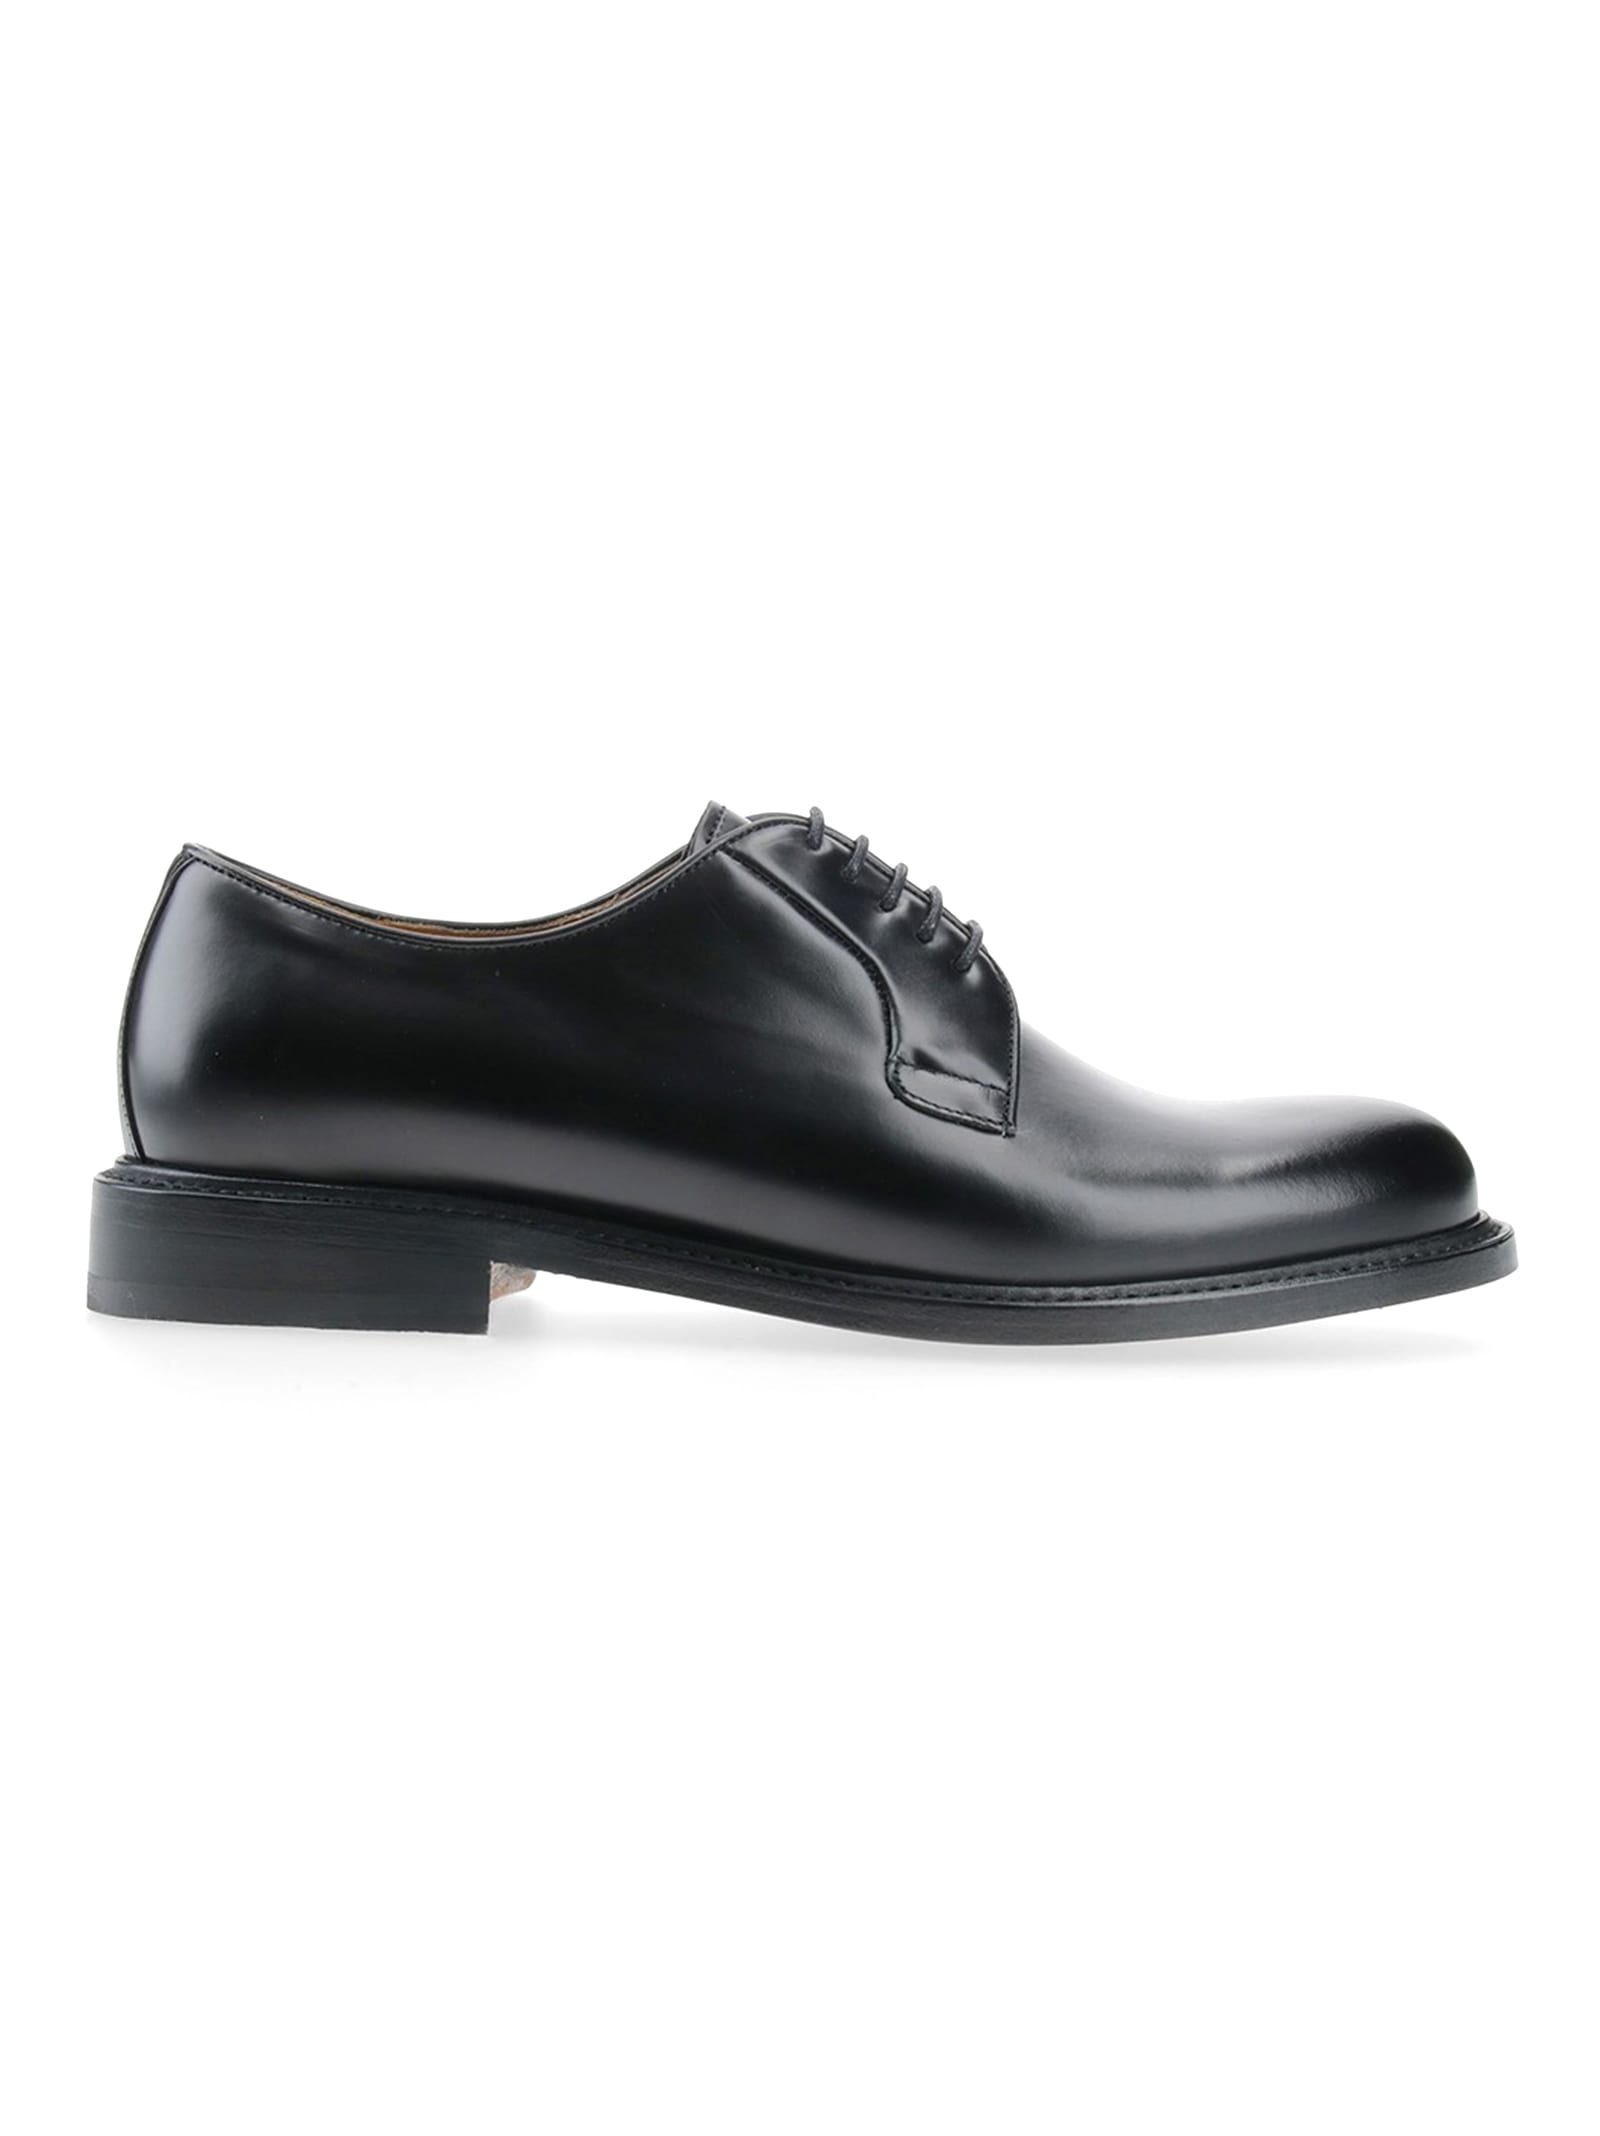 Berwick 1707 Leather Shoes